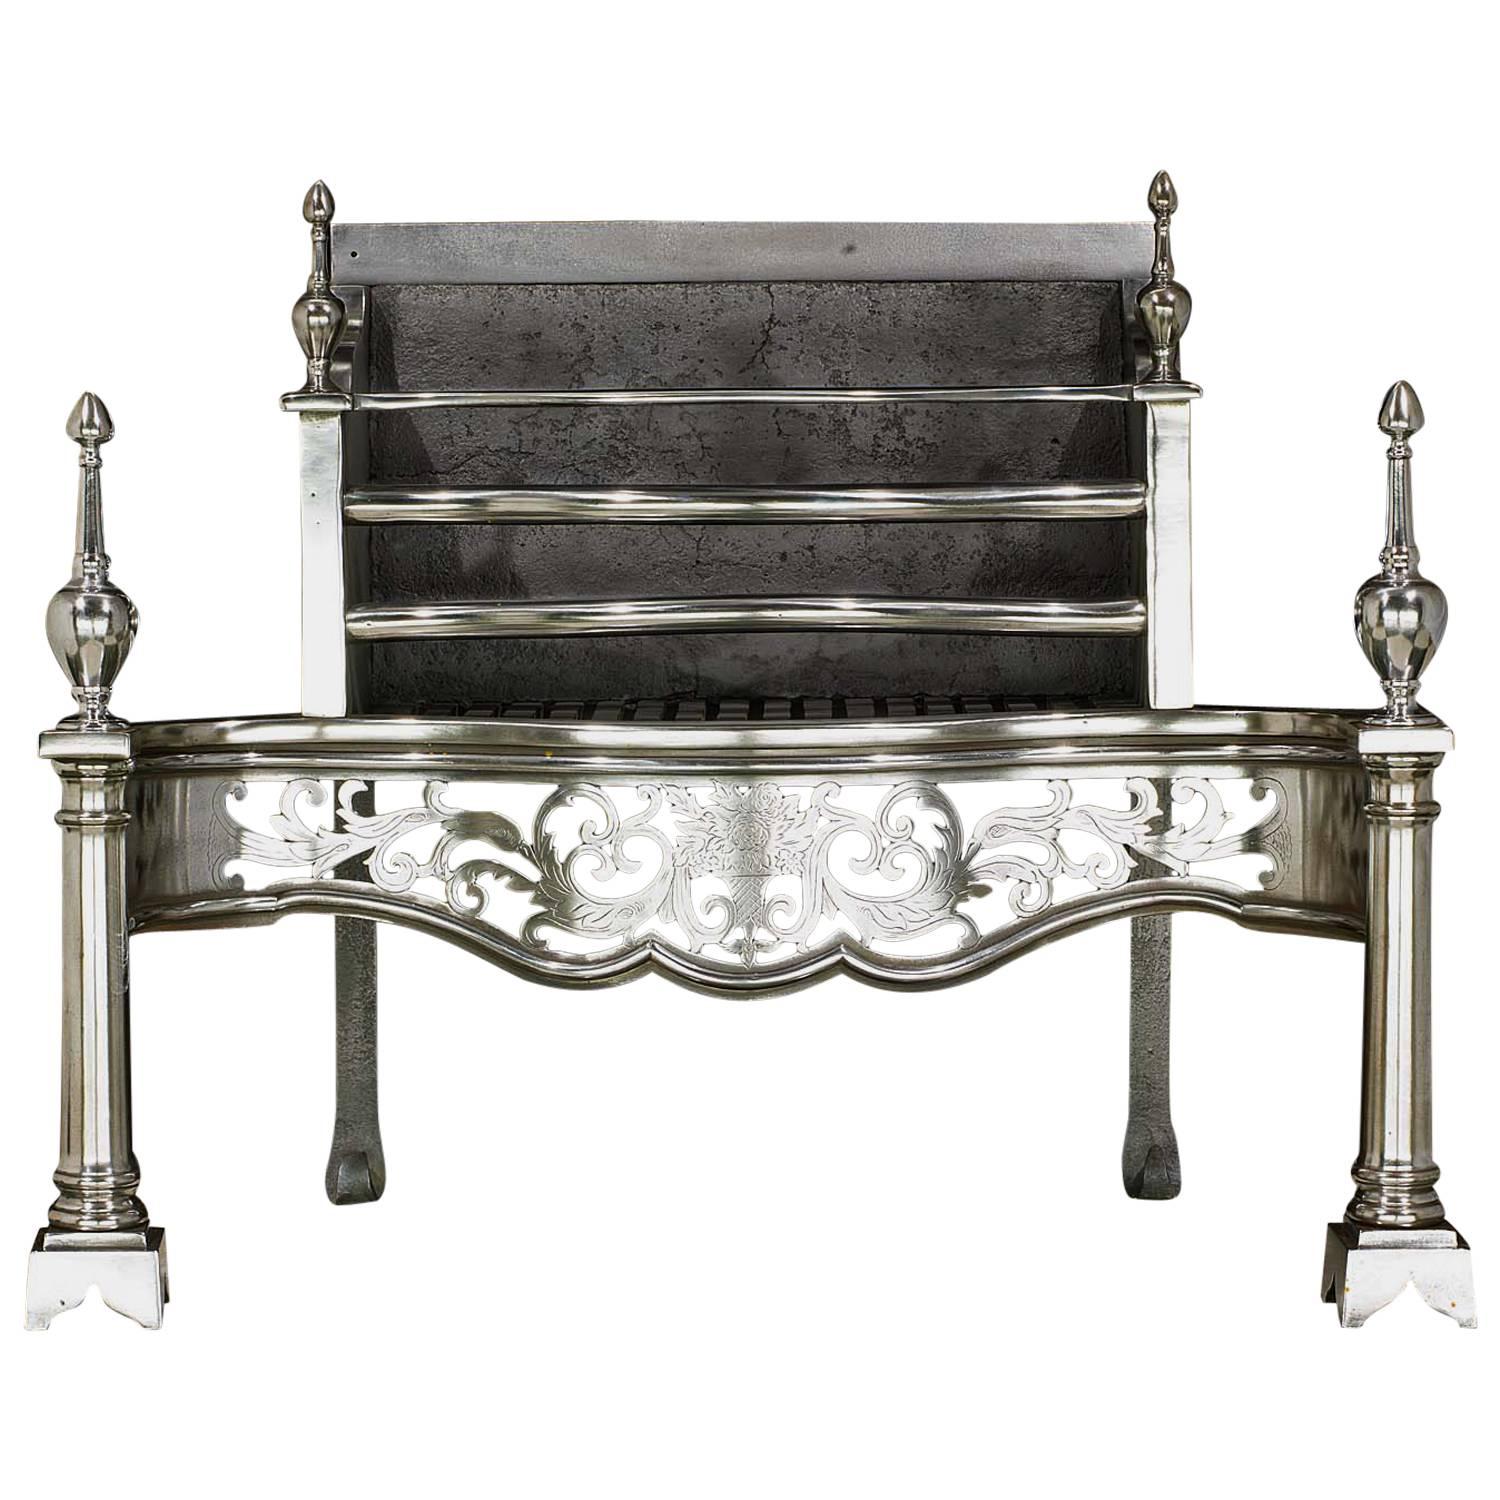 Fine Antique English George III Style Polished Steel Fire Grate, circa 1880